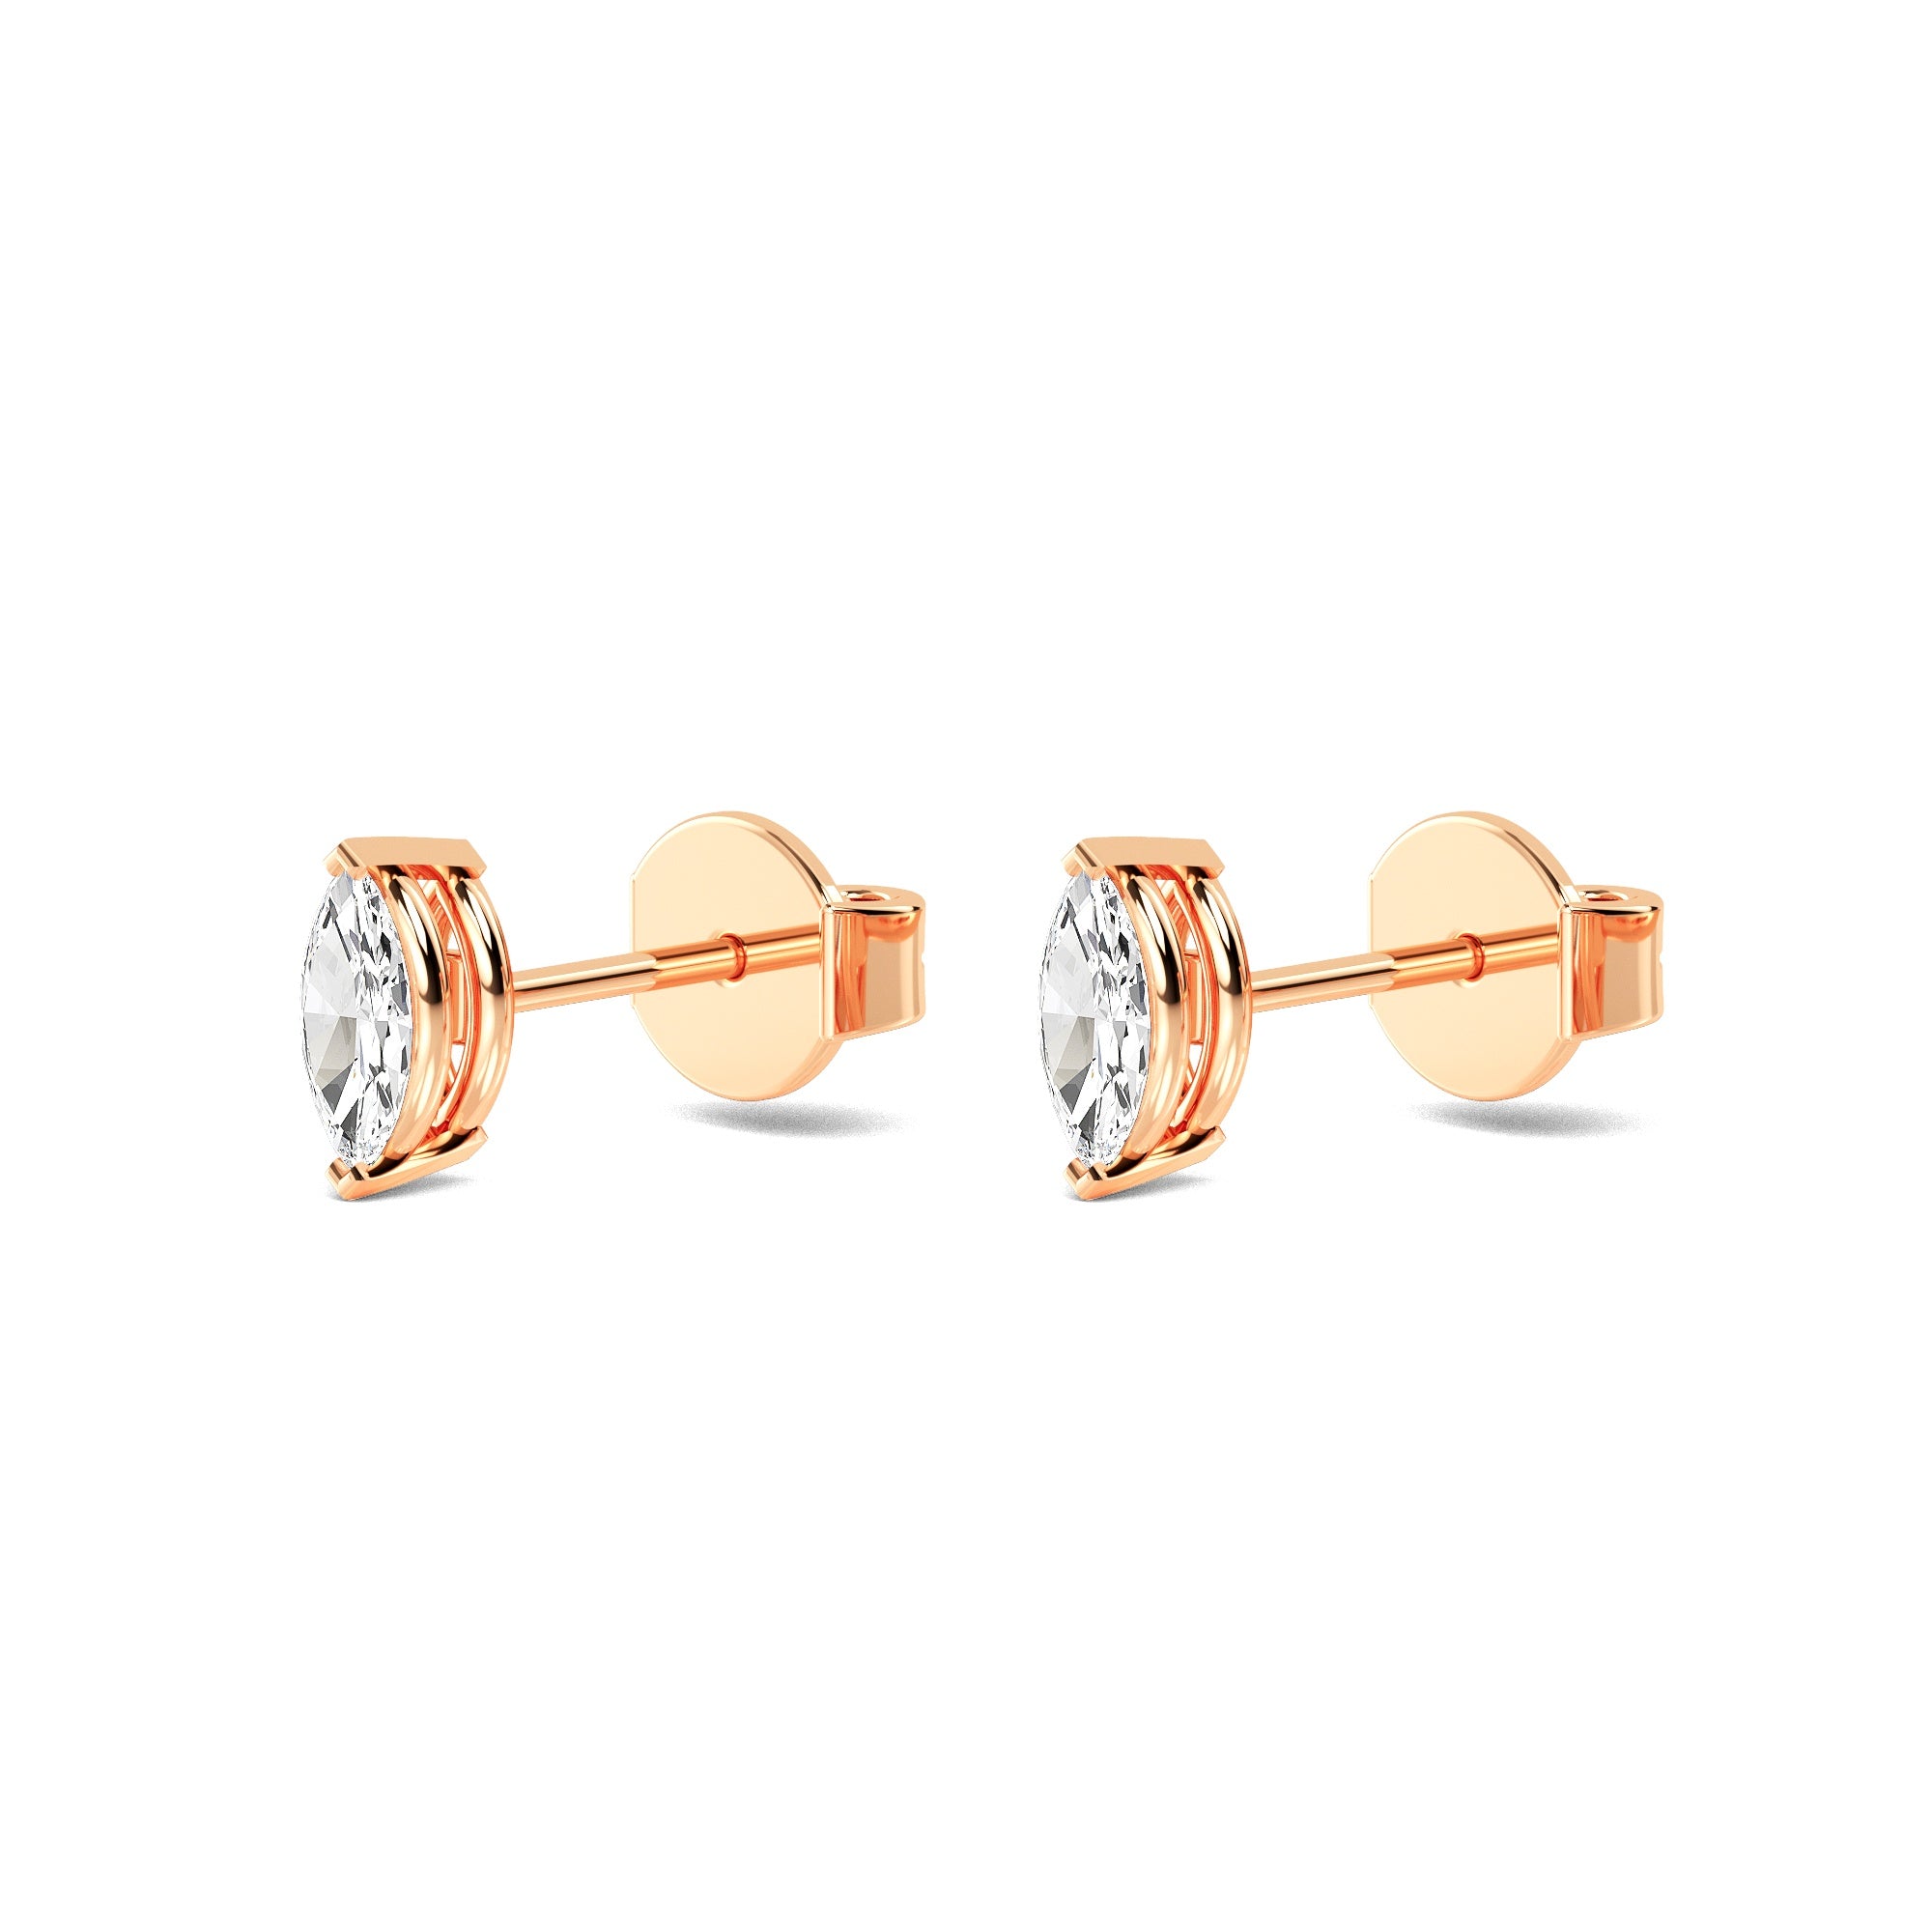 Marquise Cut Diamond Solitaire Earrings